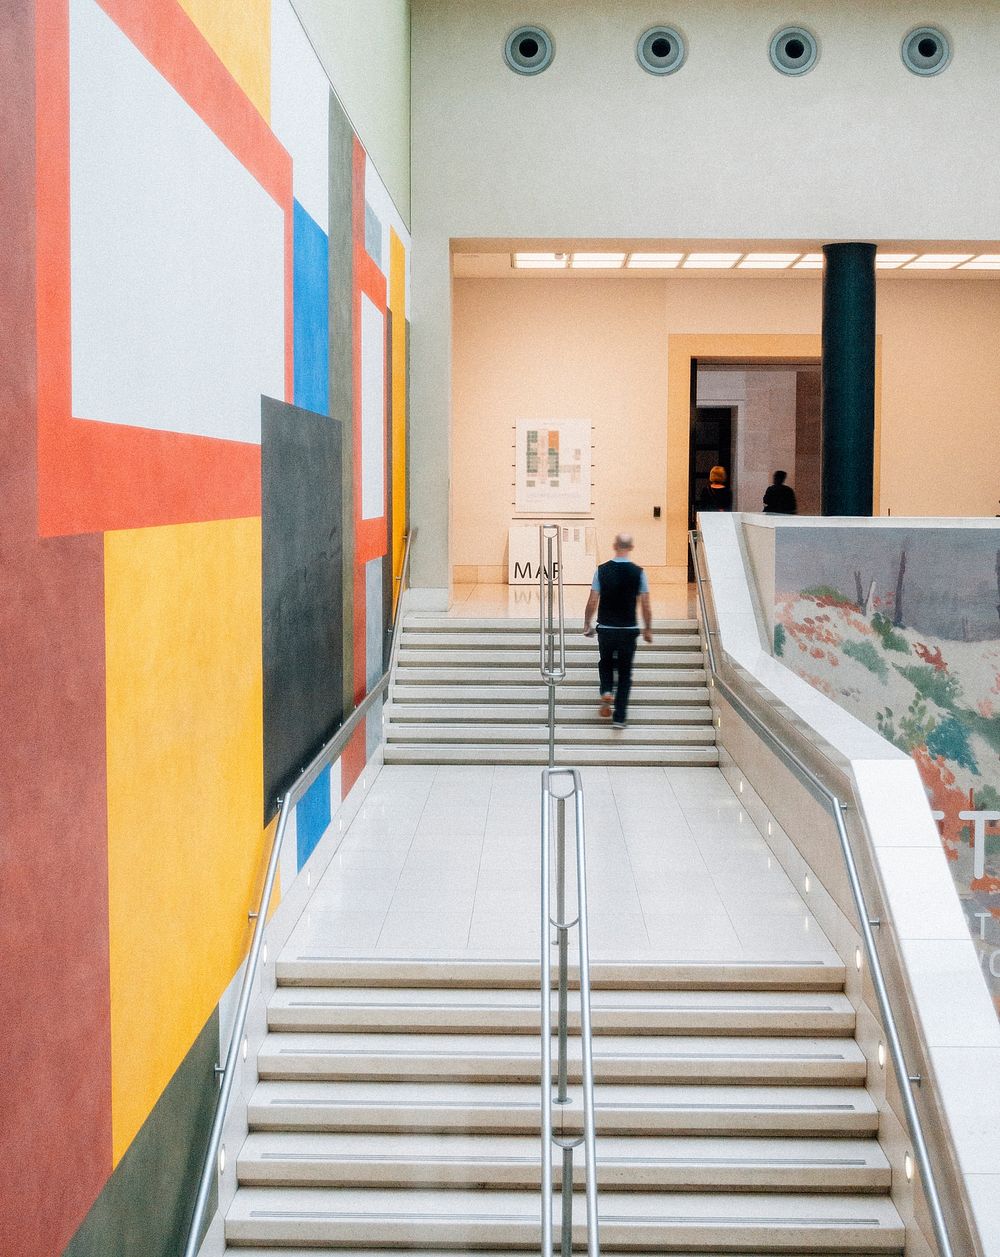 Stairs by an artistically painted wall